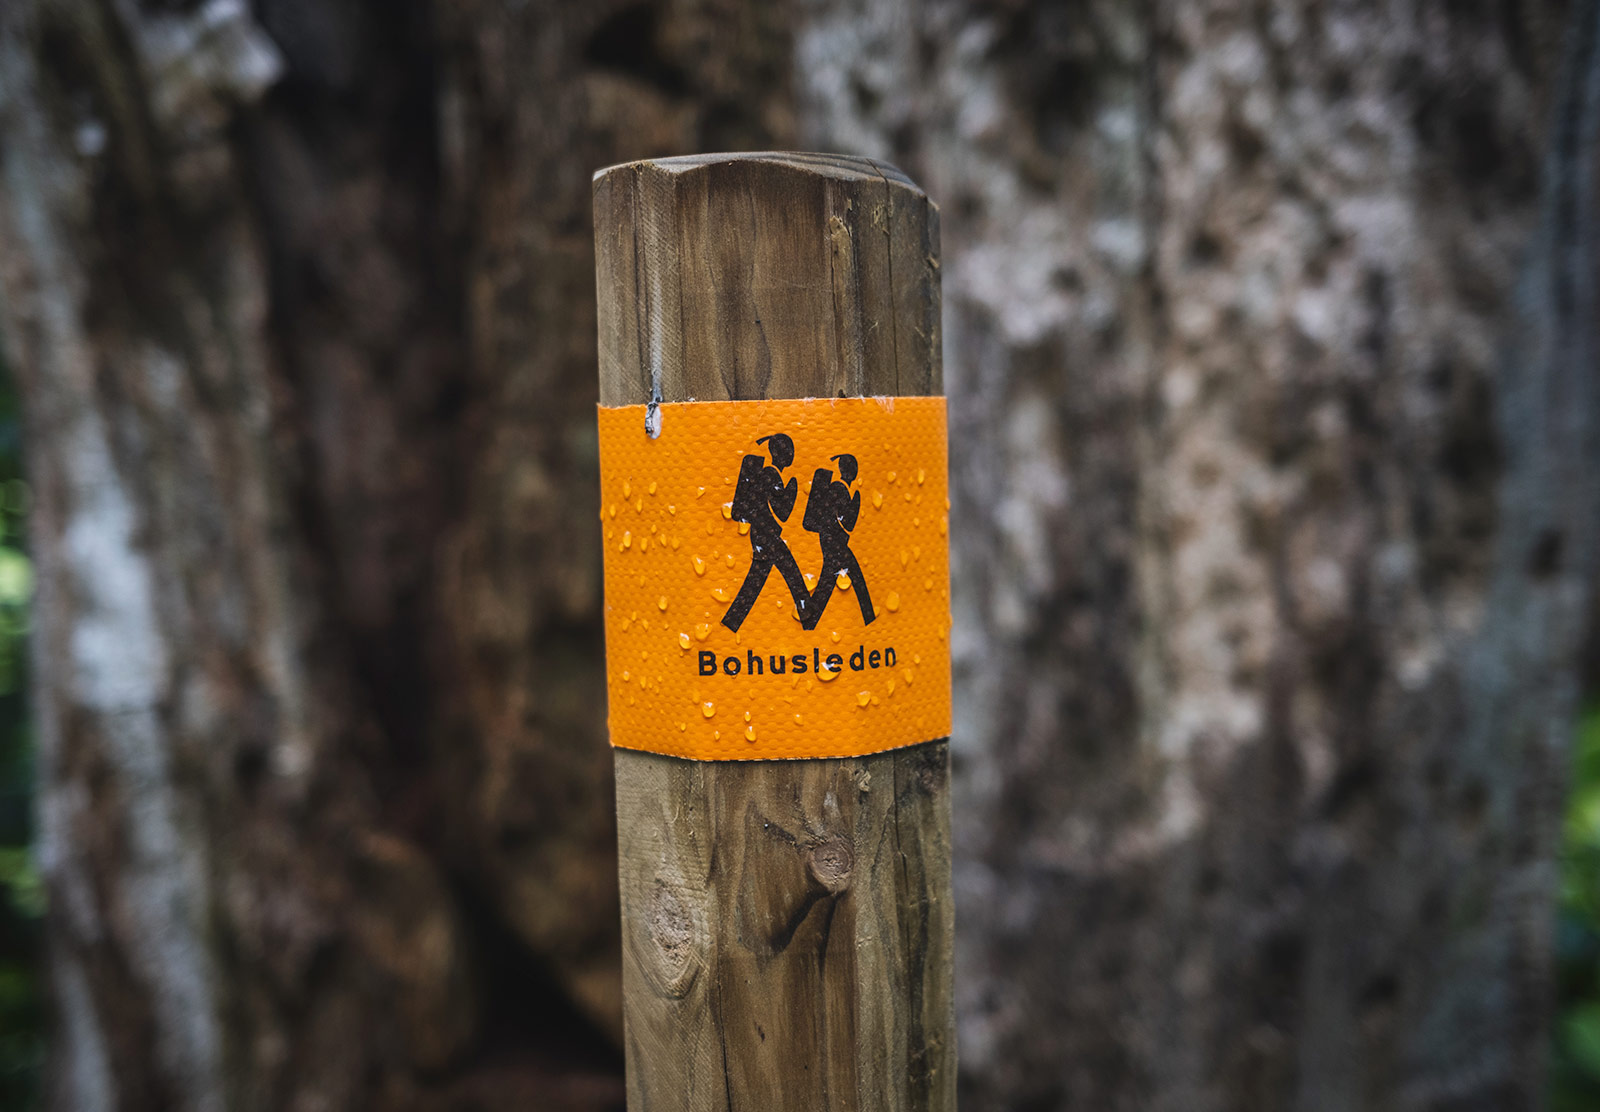 Trail marker on wooden post